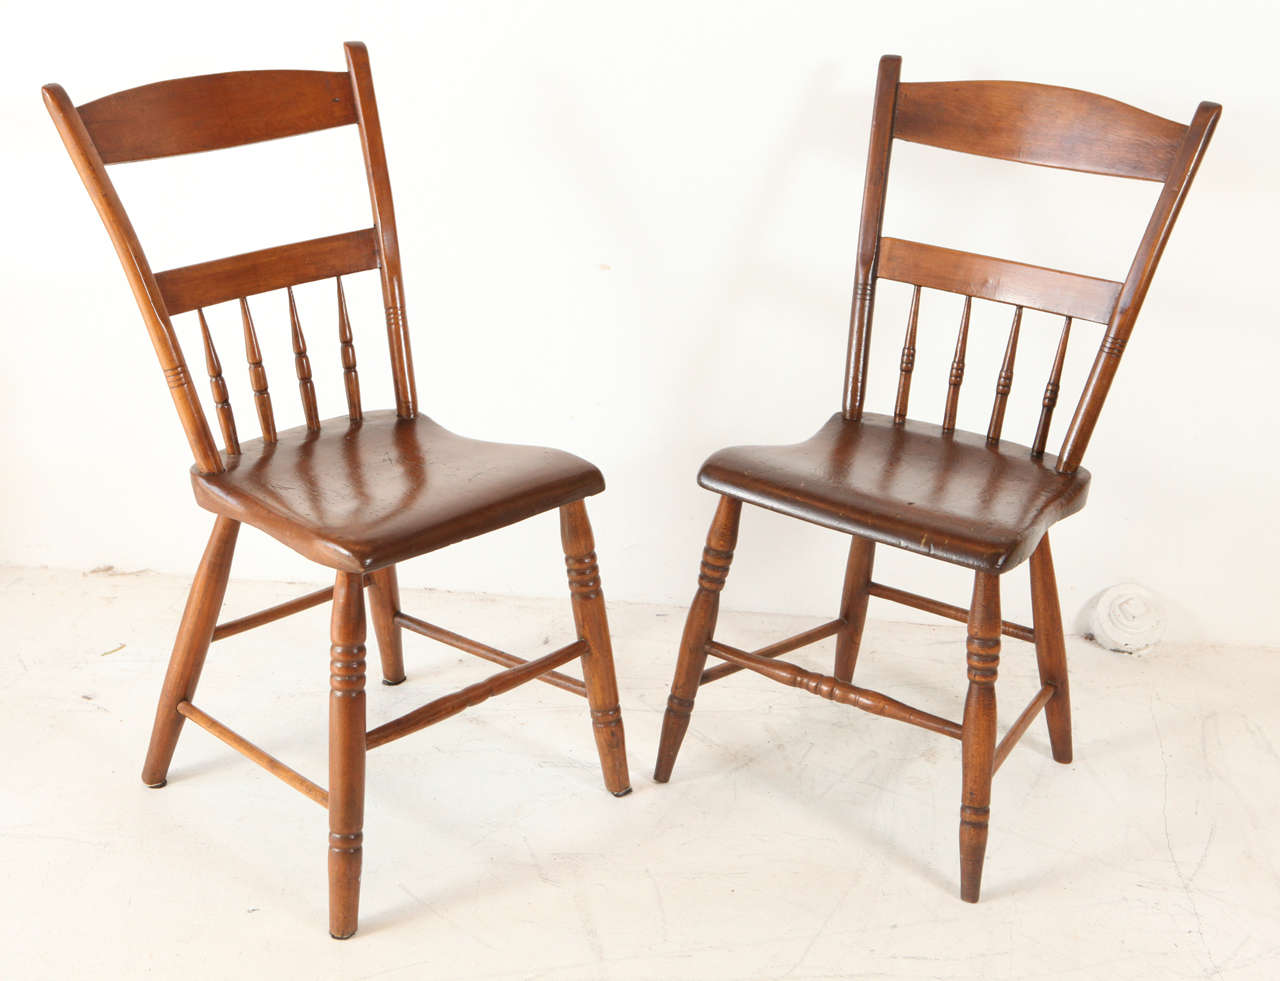 Set of Four 19th Century American Pine Side Chairs 1